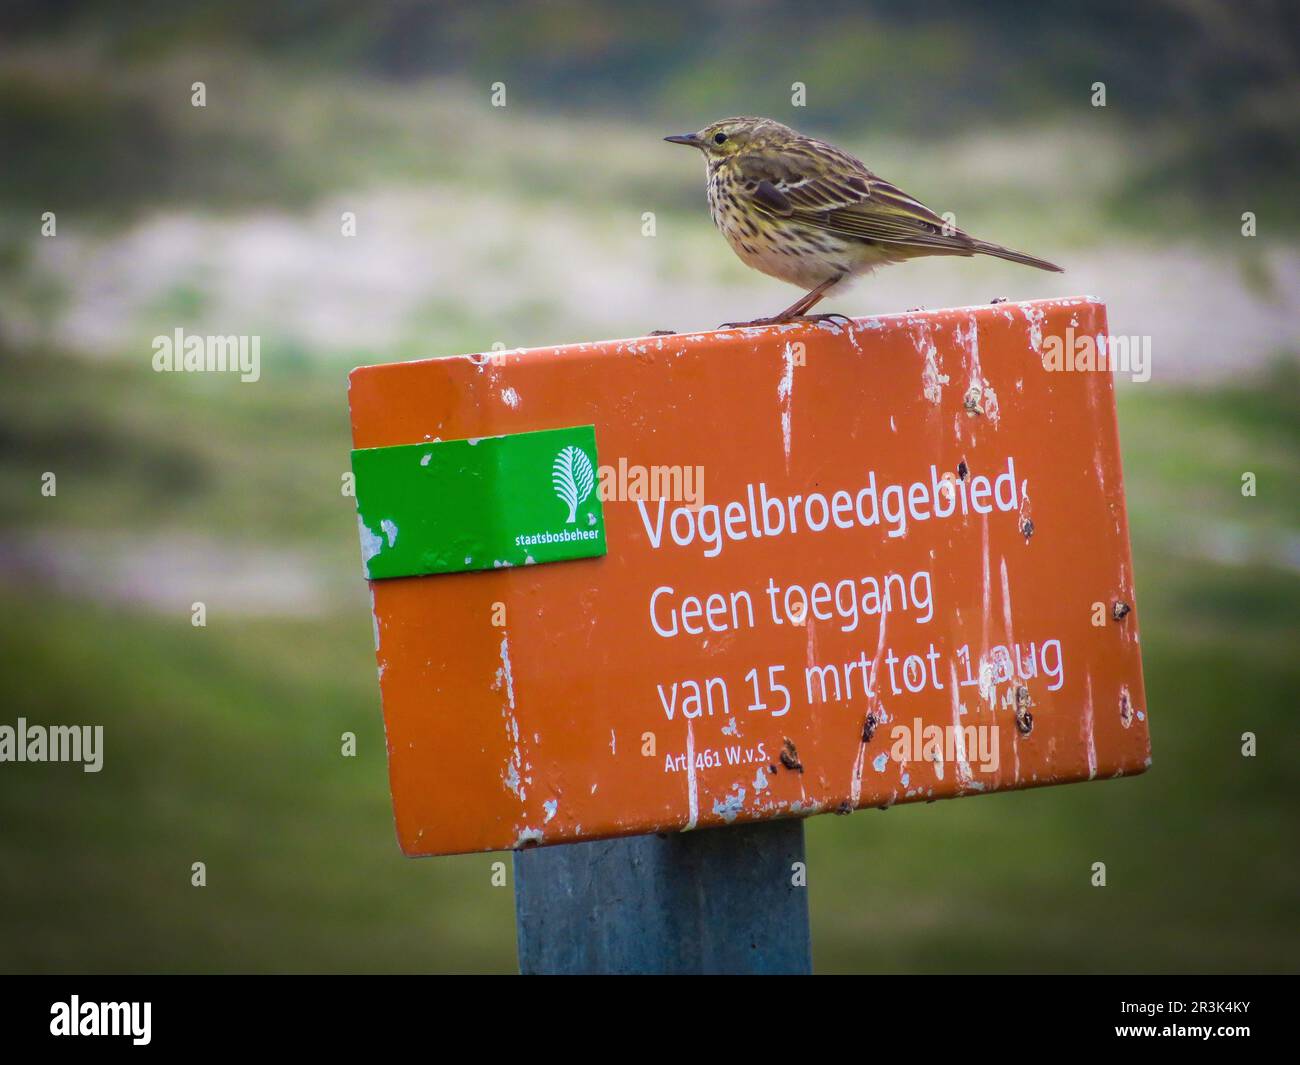 Netherlands, on the wadden island of Vlieland a meadow pipit sits on a no entry sign near the breeding area Stock Photo